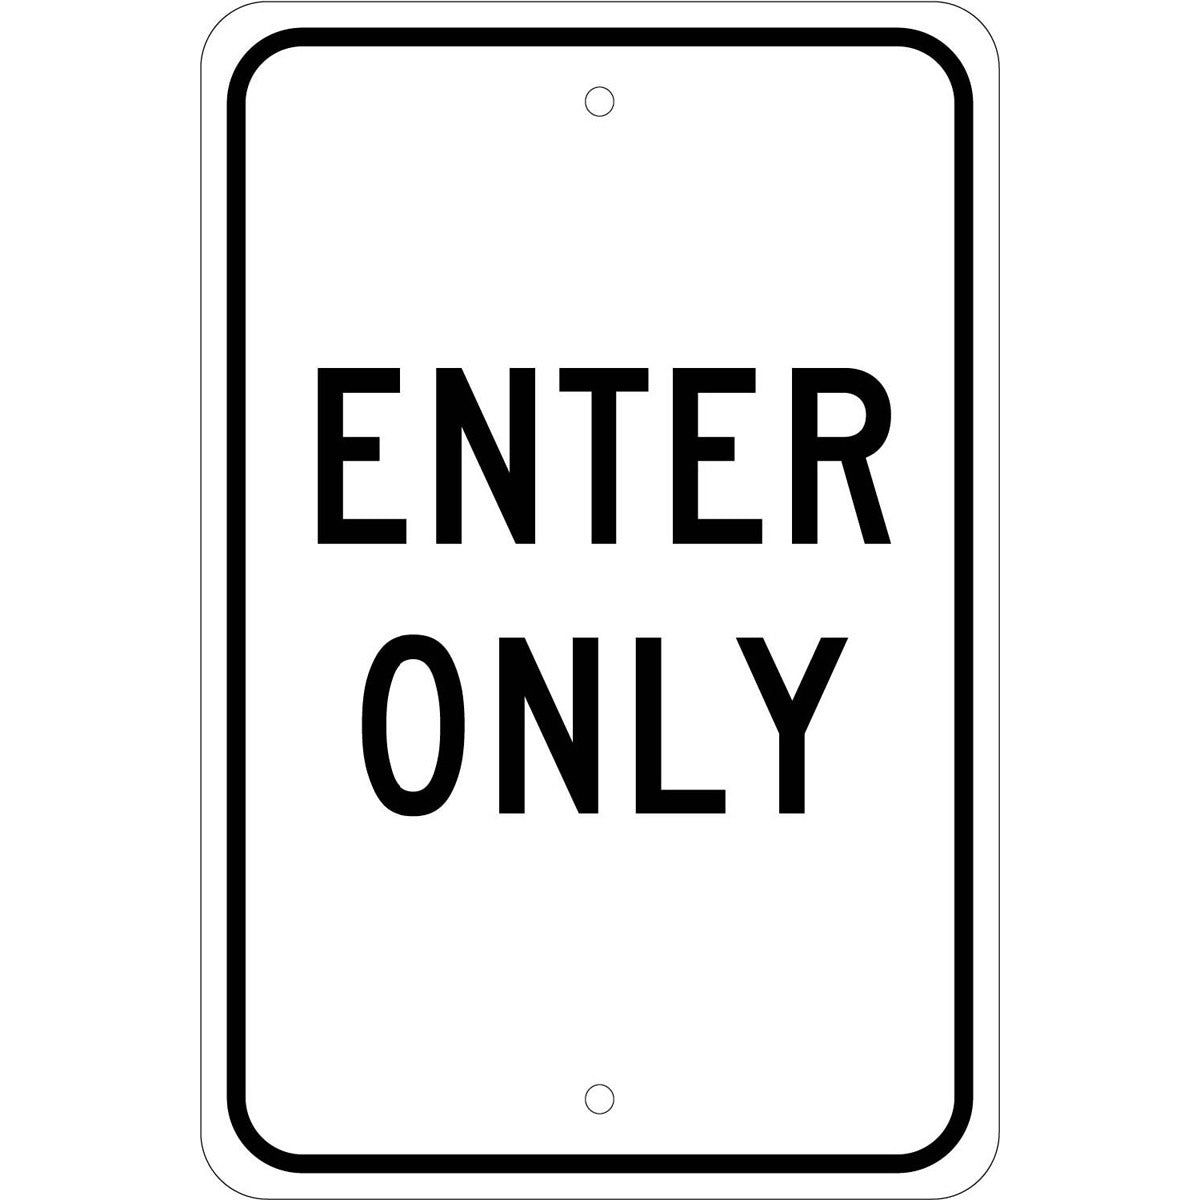 NM 18" X 12" White .08" Aluminum Parking And Traffic Sign "ENTER ONLY"